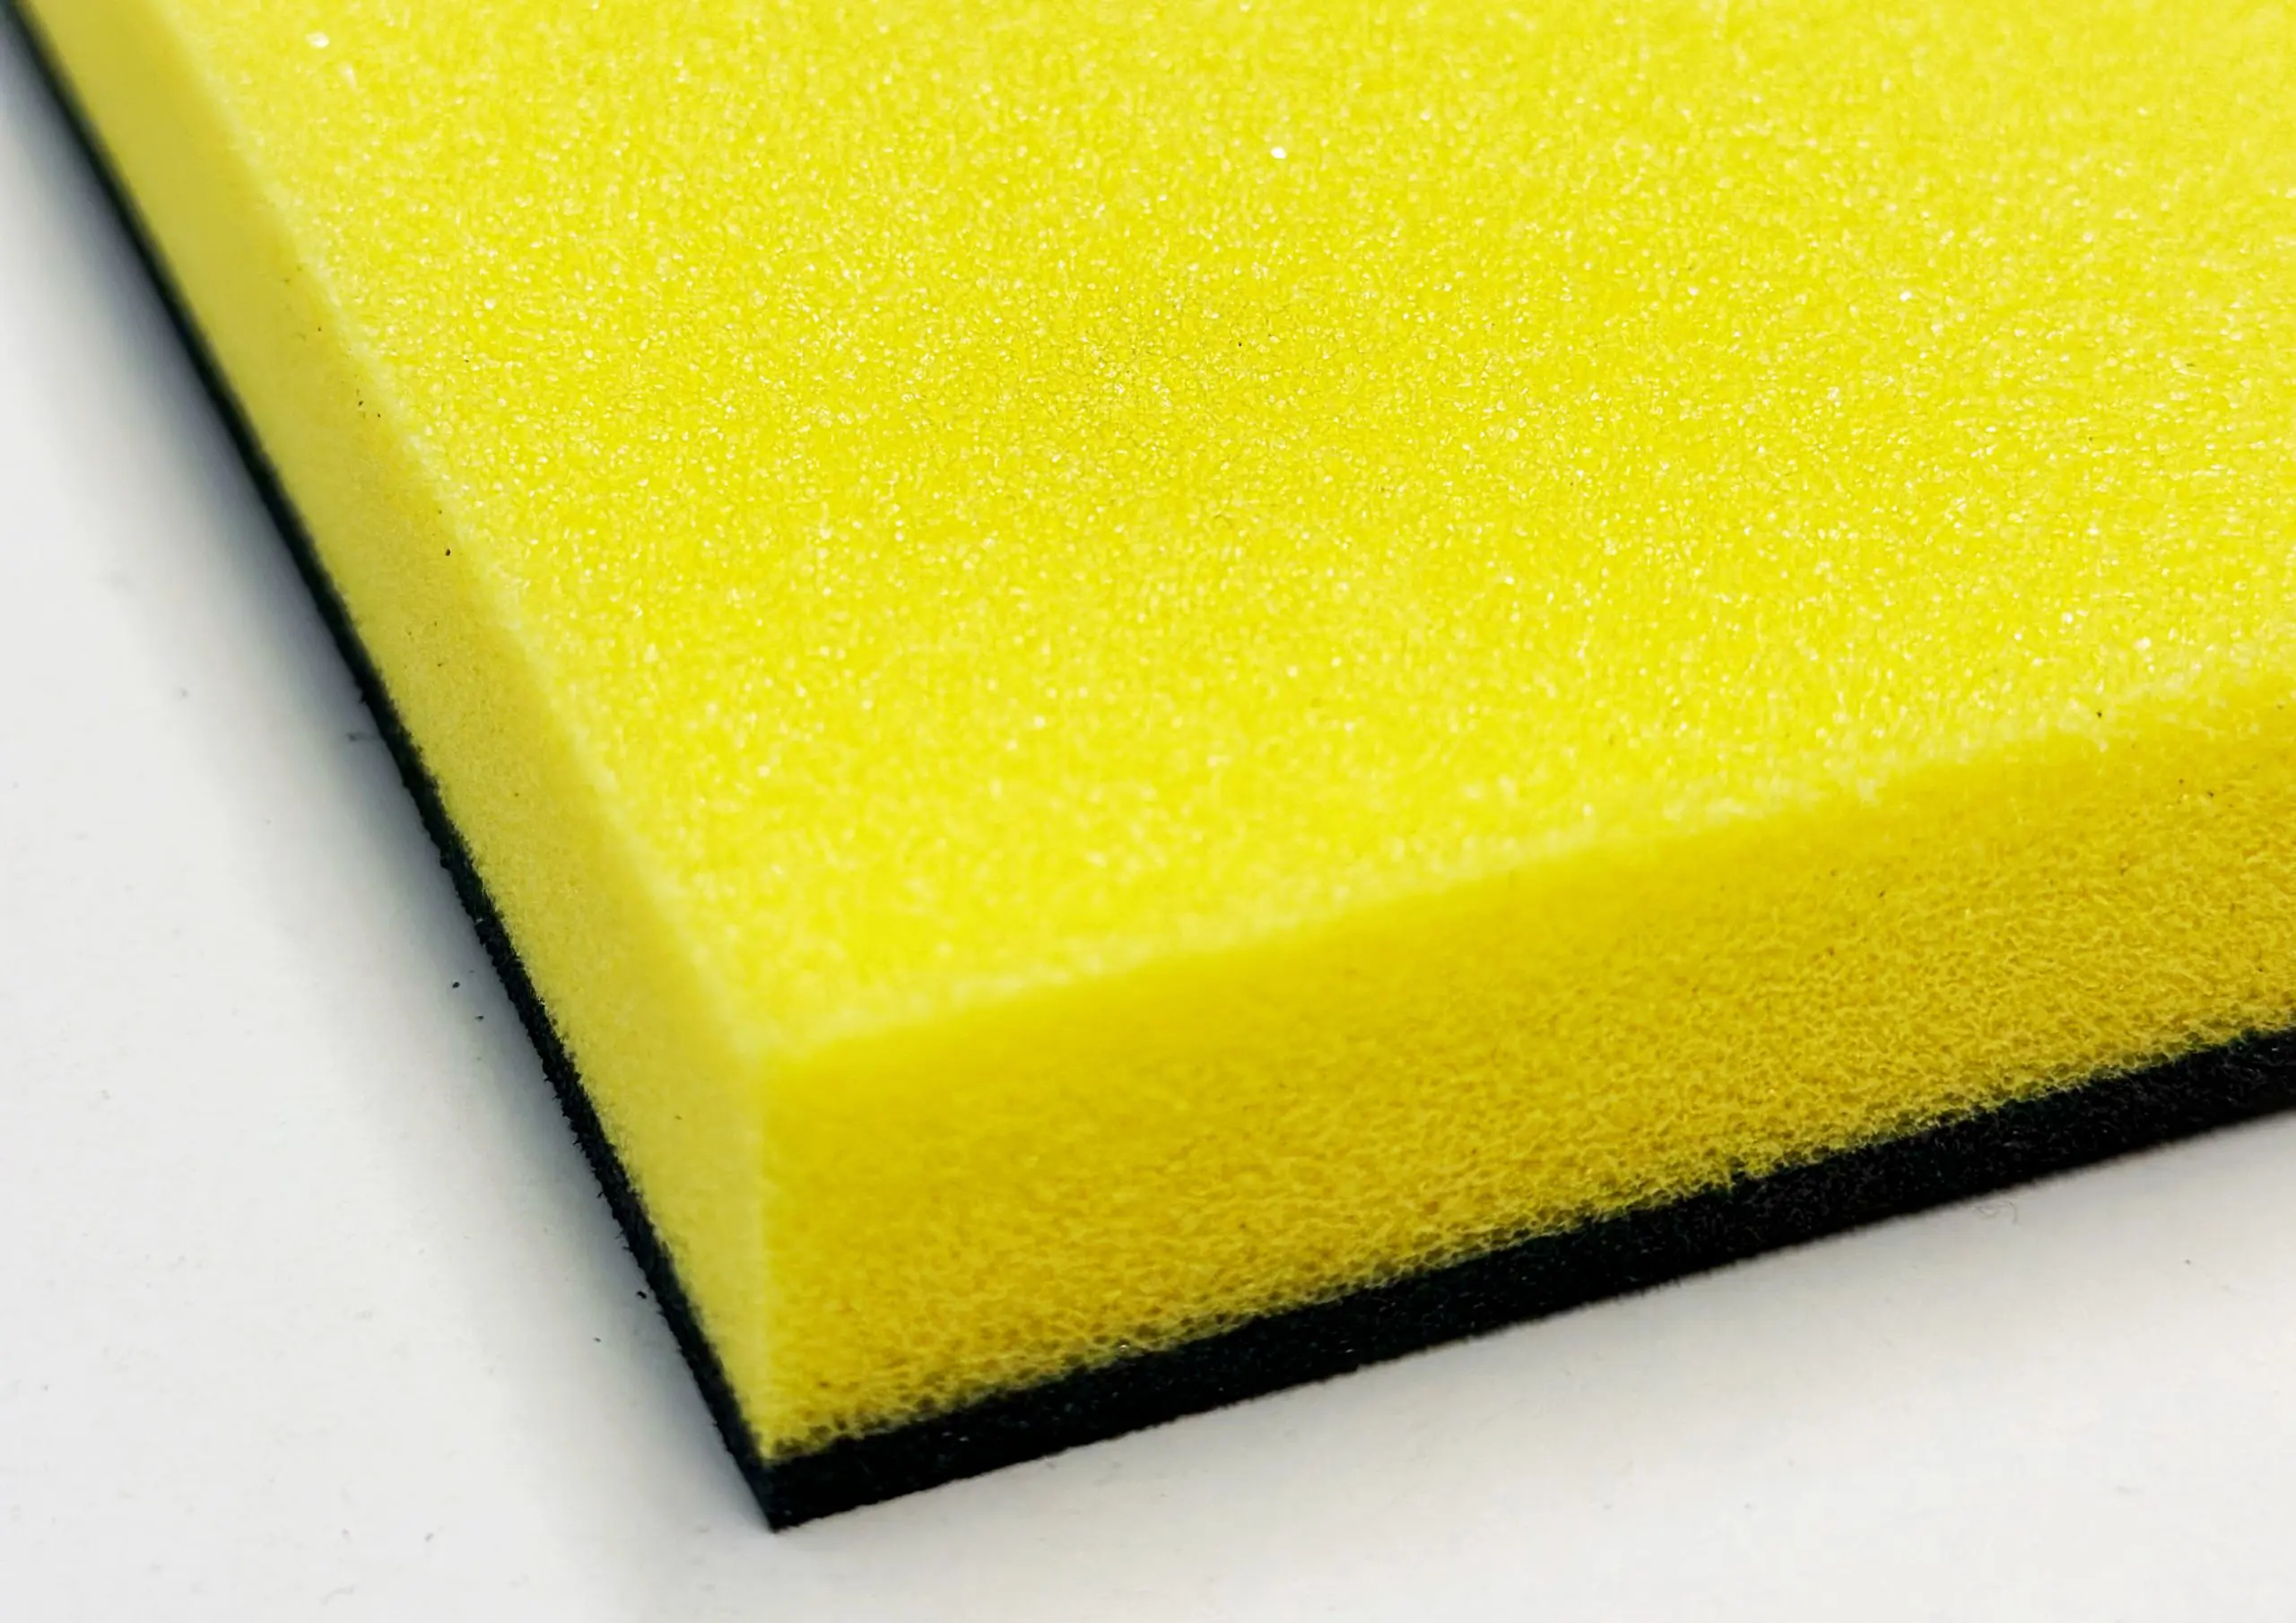 Polyethylene Non Cross-Linked yellow foam, offers durability and its very versatile